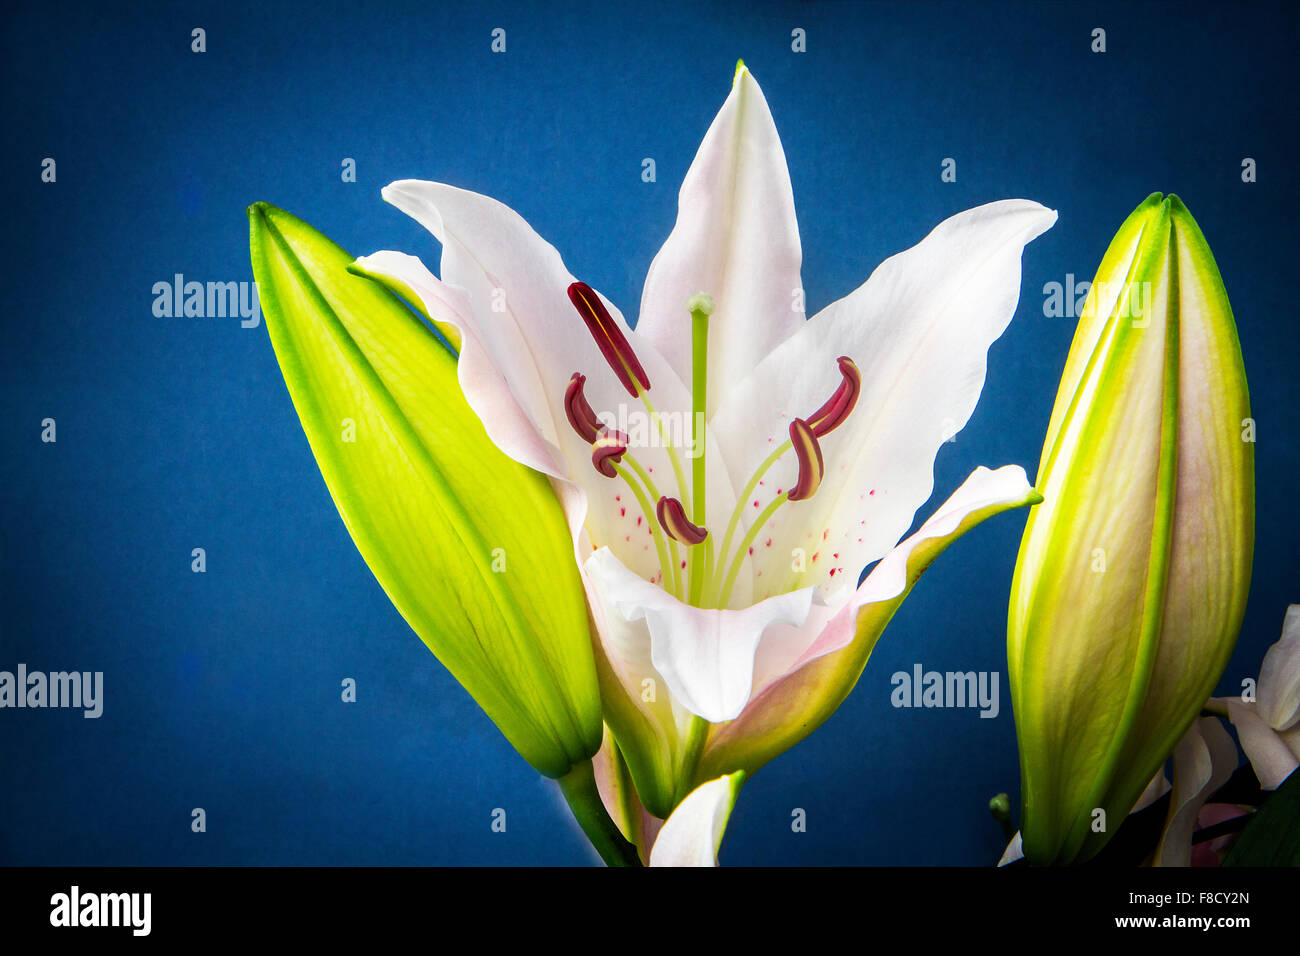 White lilies against a blue background Stock Photo